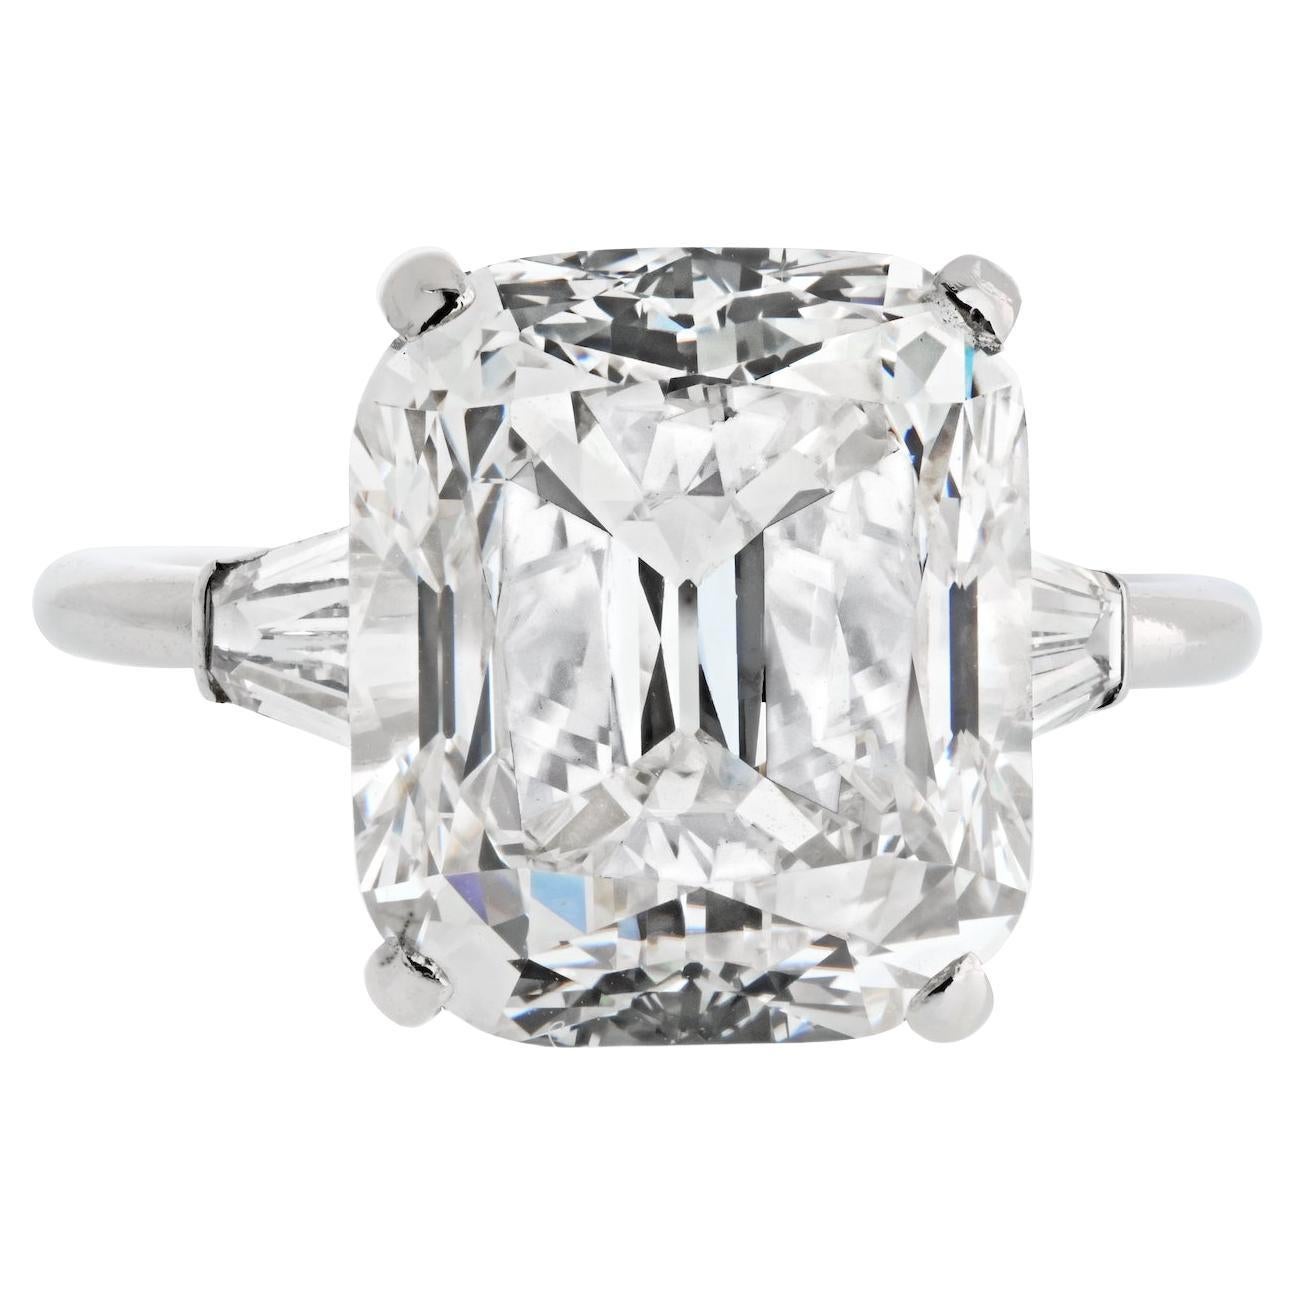 8.17ct Cushion Old Mine Cut Diamond L color SI2 clarity GIA Engagement Ring